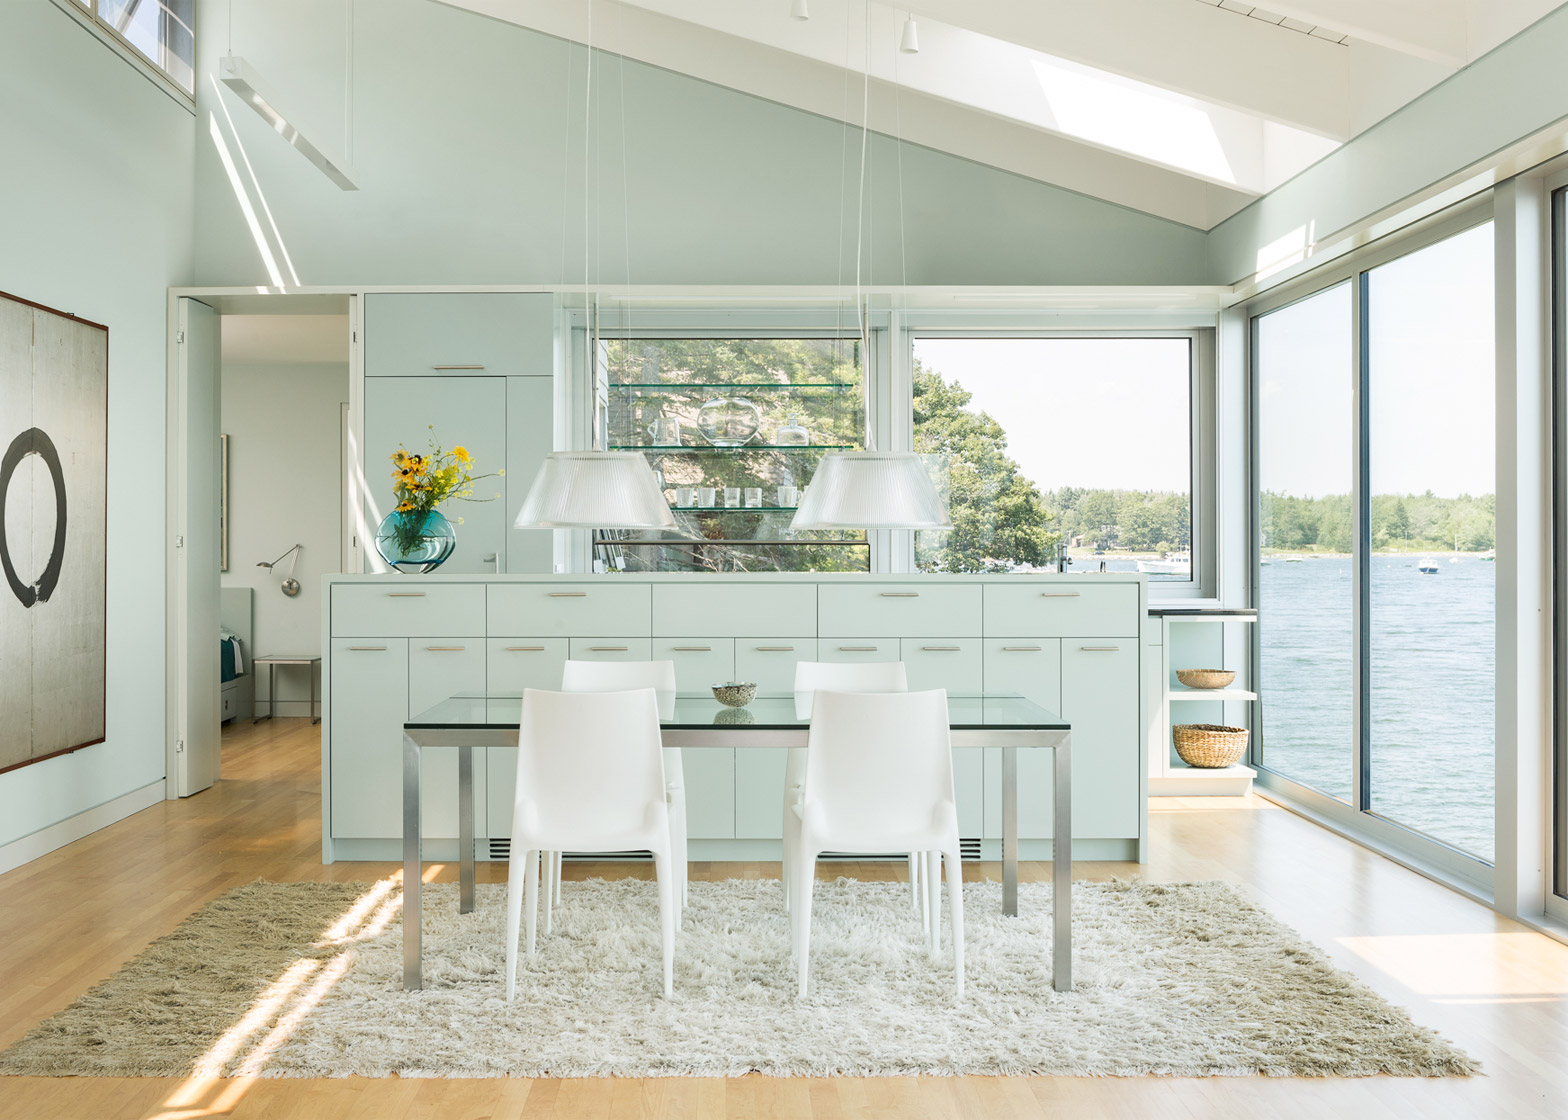 House Over The Sea By Elliott Elliott Faces A Bay In Maine